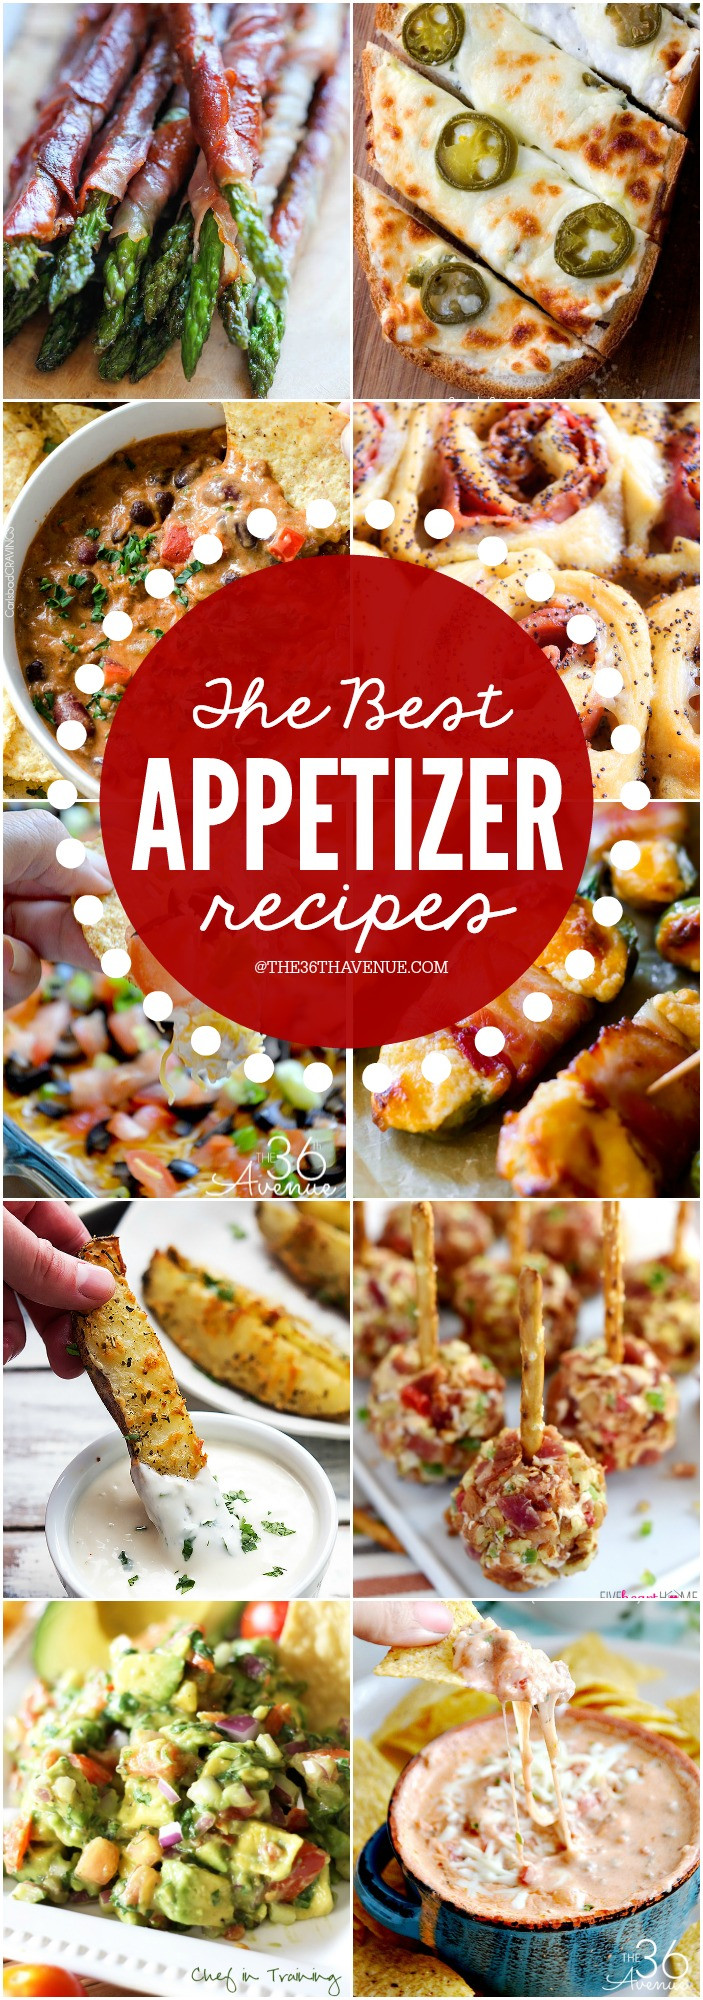 Appetizers For Christmas Party
 Weekly Meal Plan Week 12 The 36th AVENUE